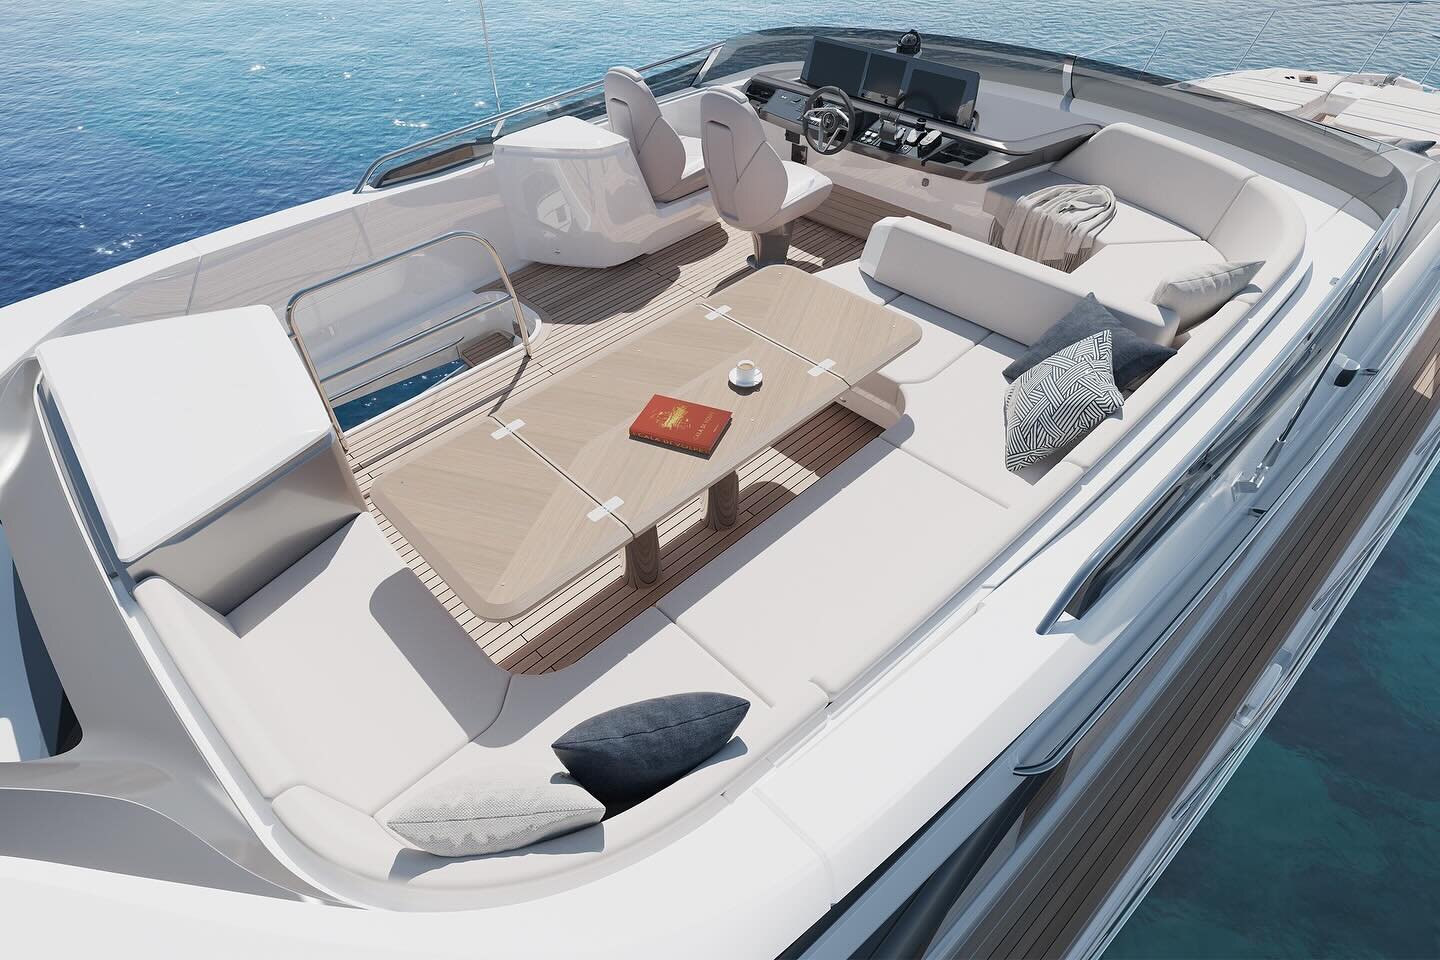 The all-new Princess S65.
Dynamic. Stylish. Cool.

Learn more via the link in our bio👆

#PrincessYachts #ExperienceTheExceptional #S65